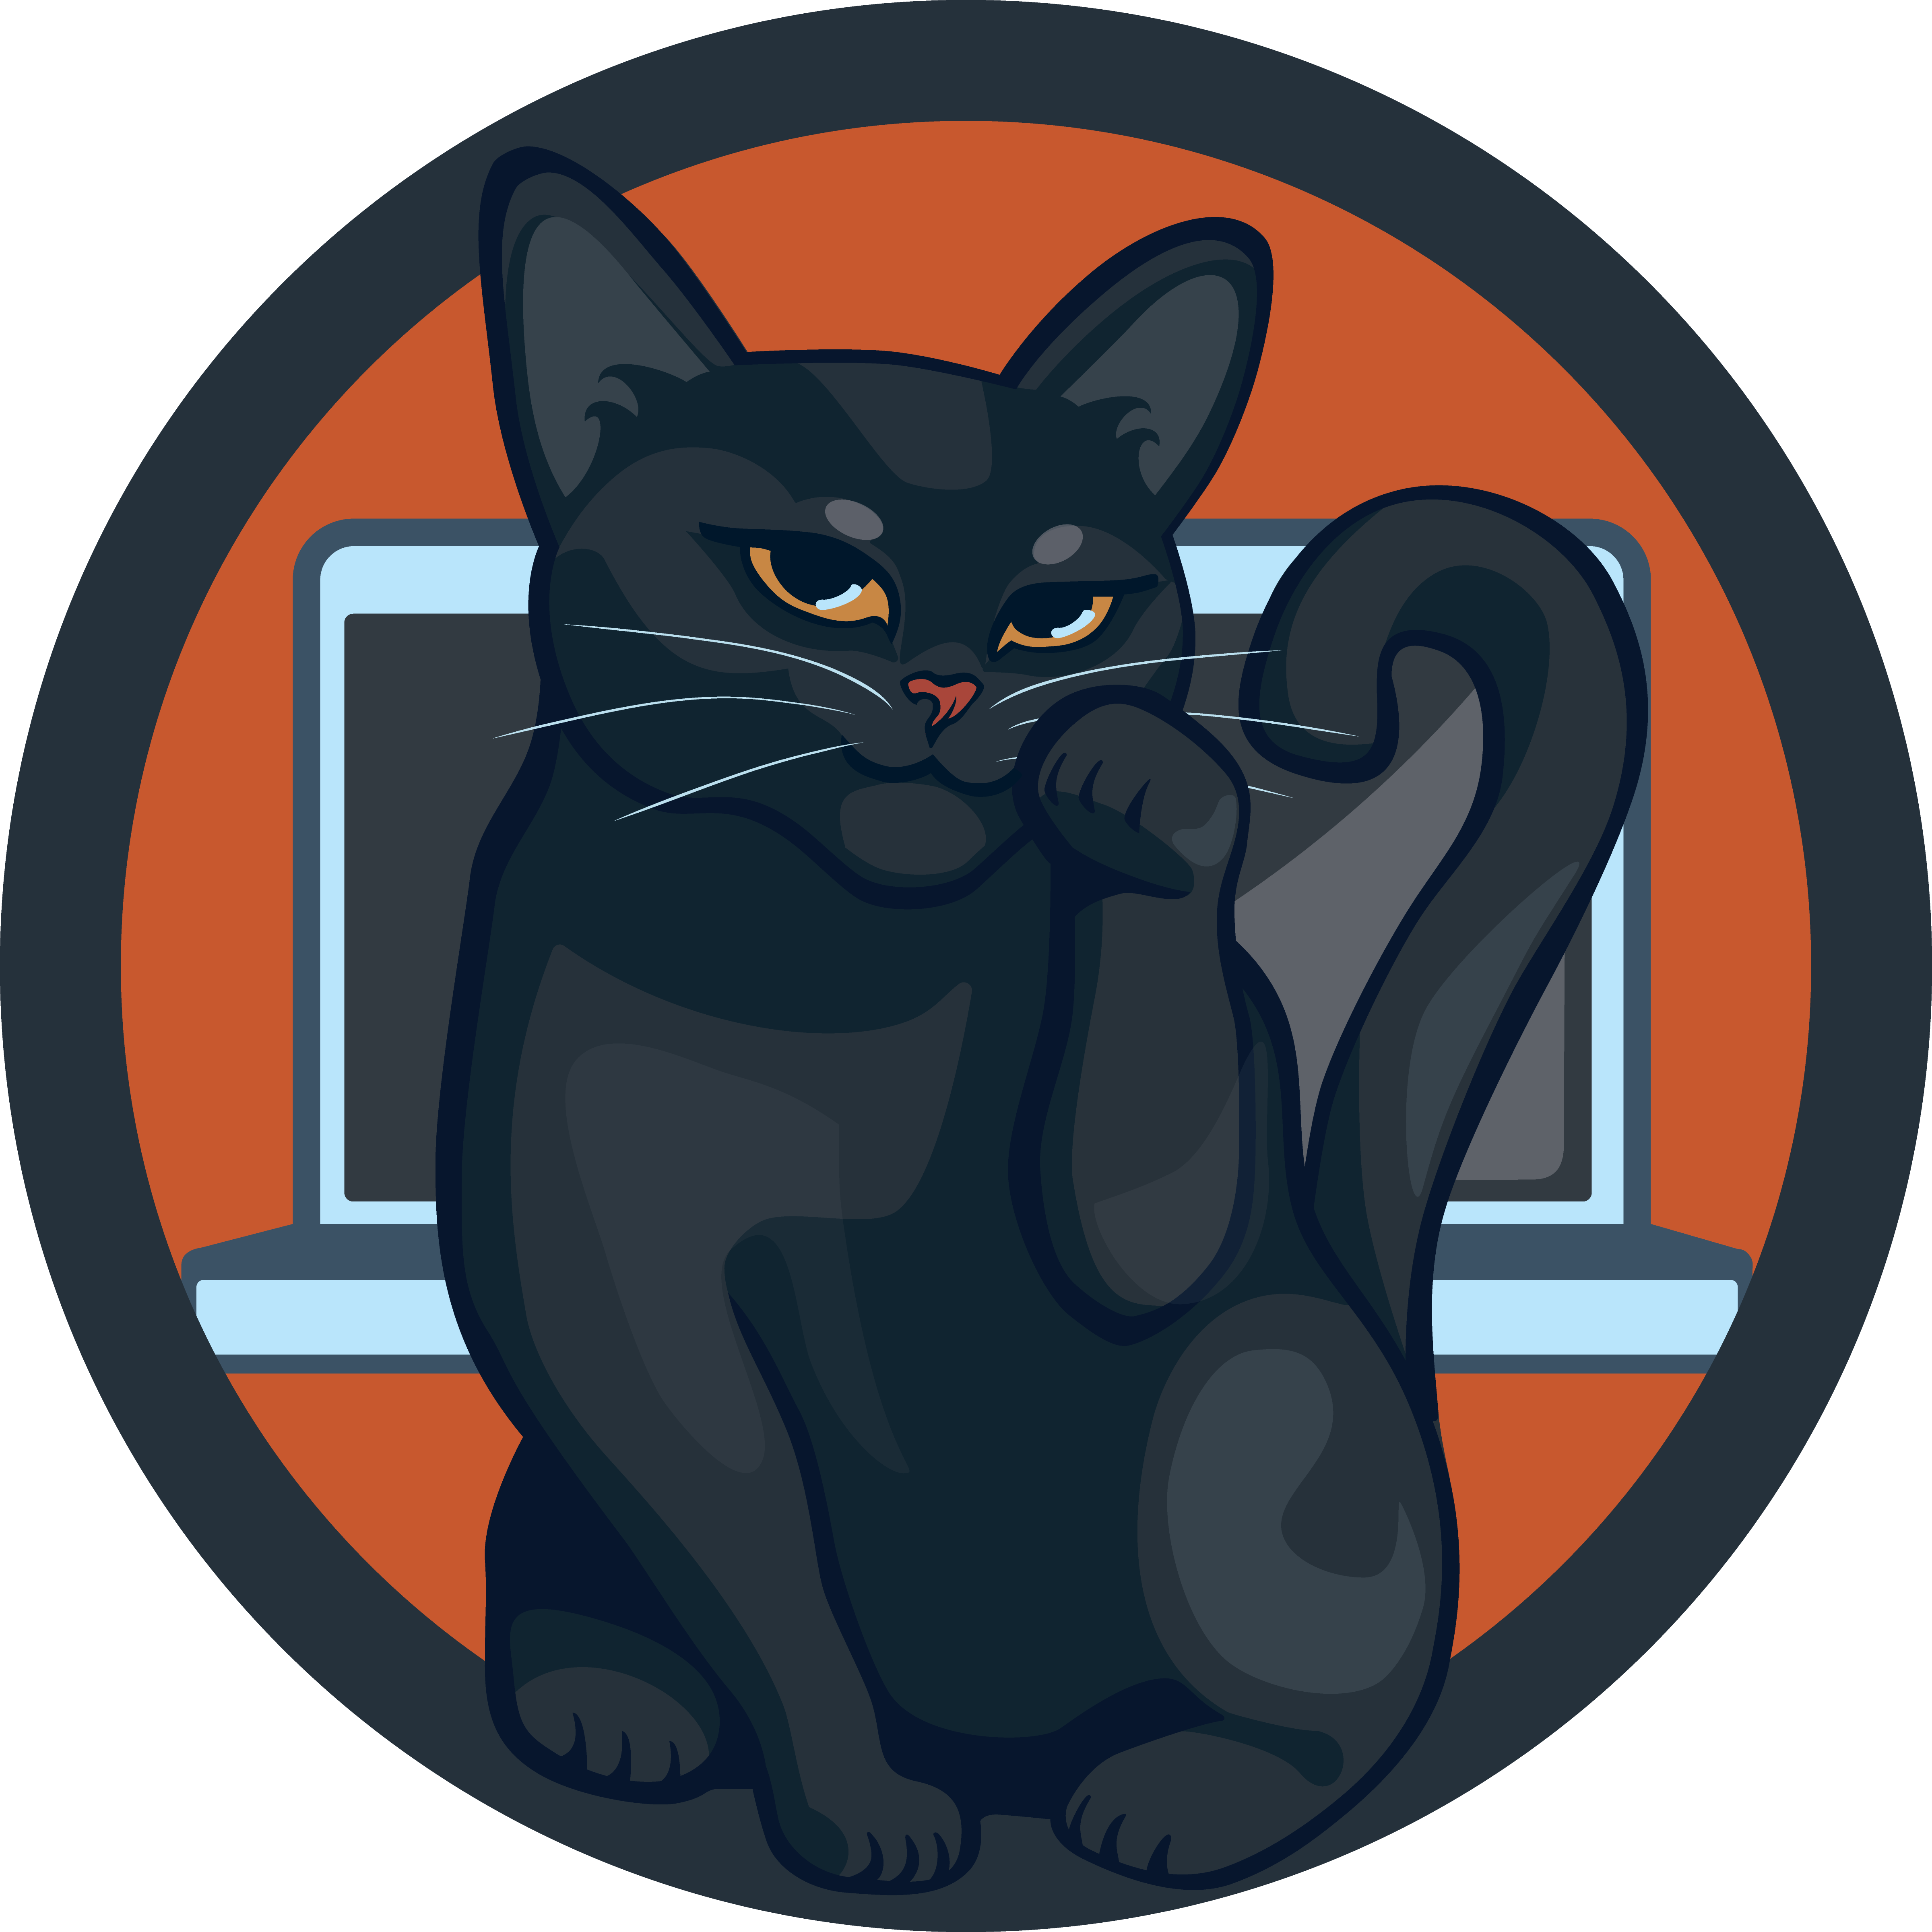 DWG logo featuring a black cat in a traditional lucky cat pose in front of a laptop.